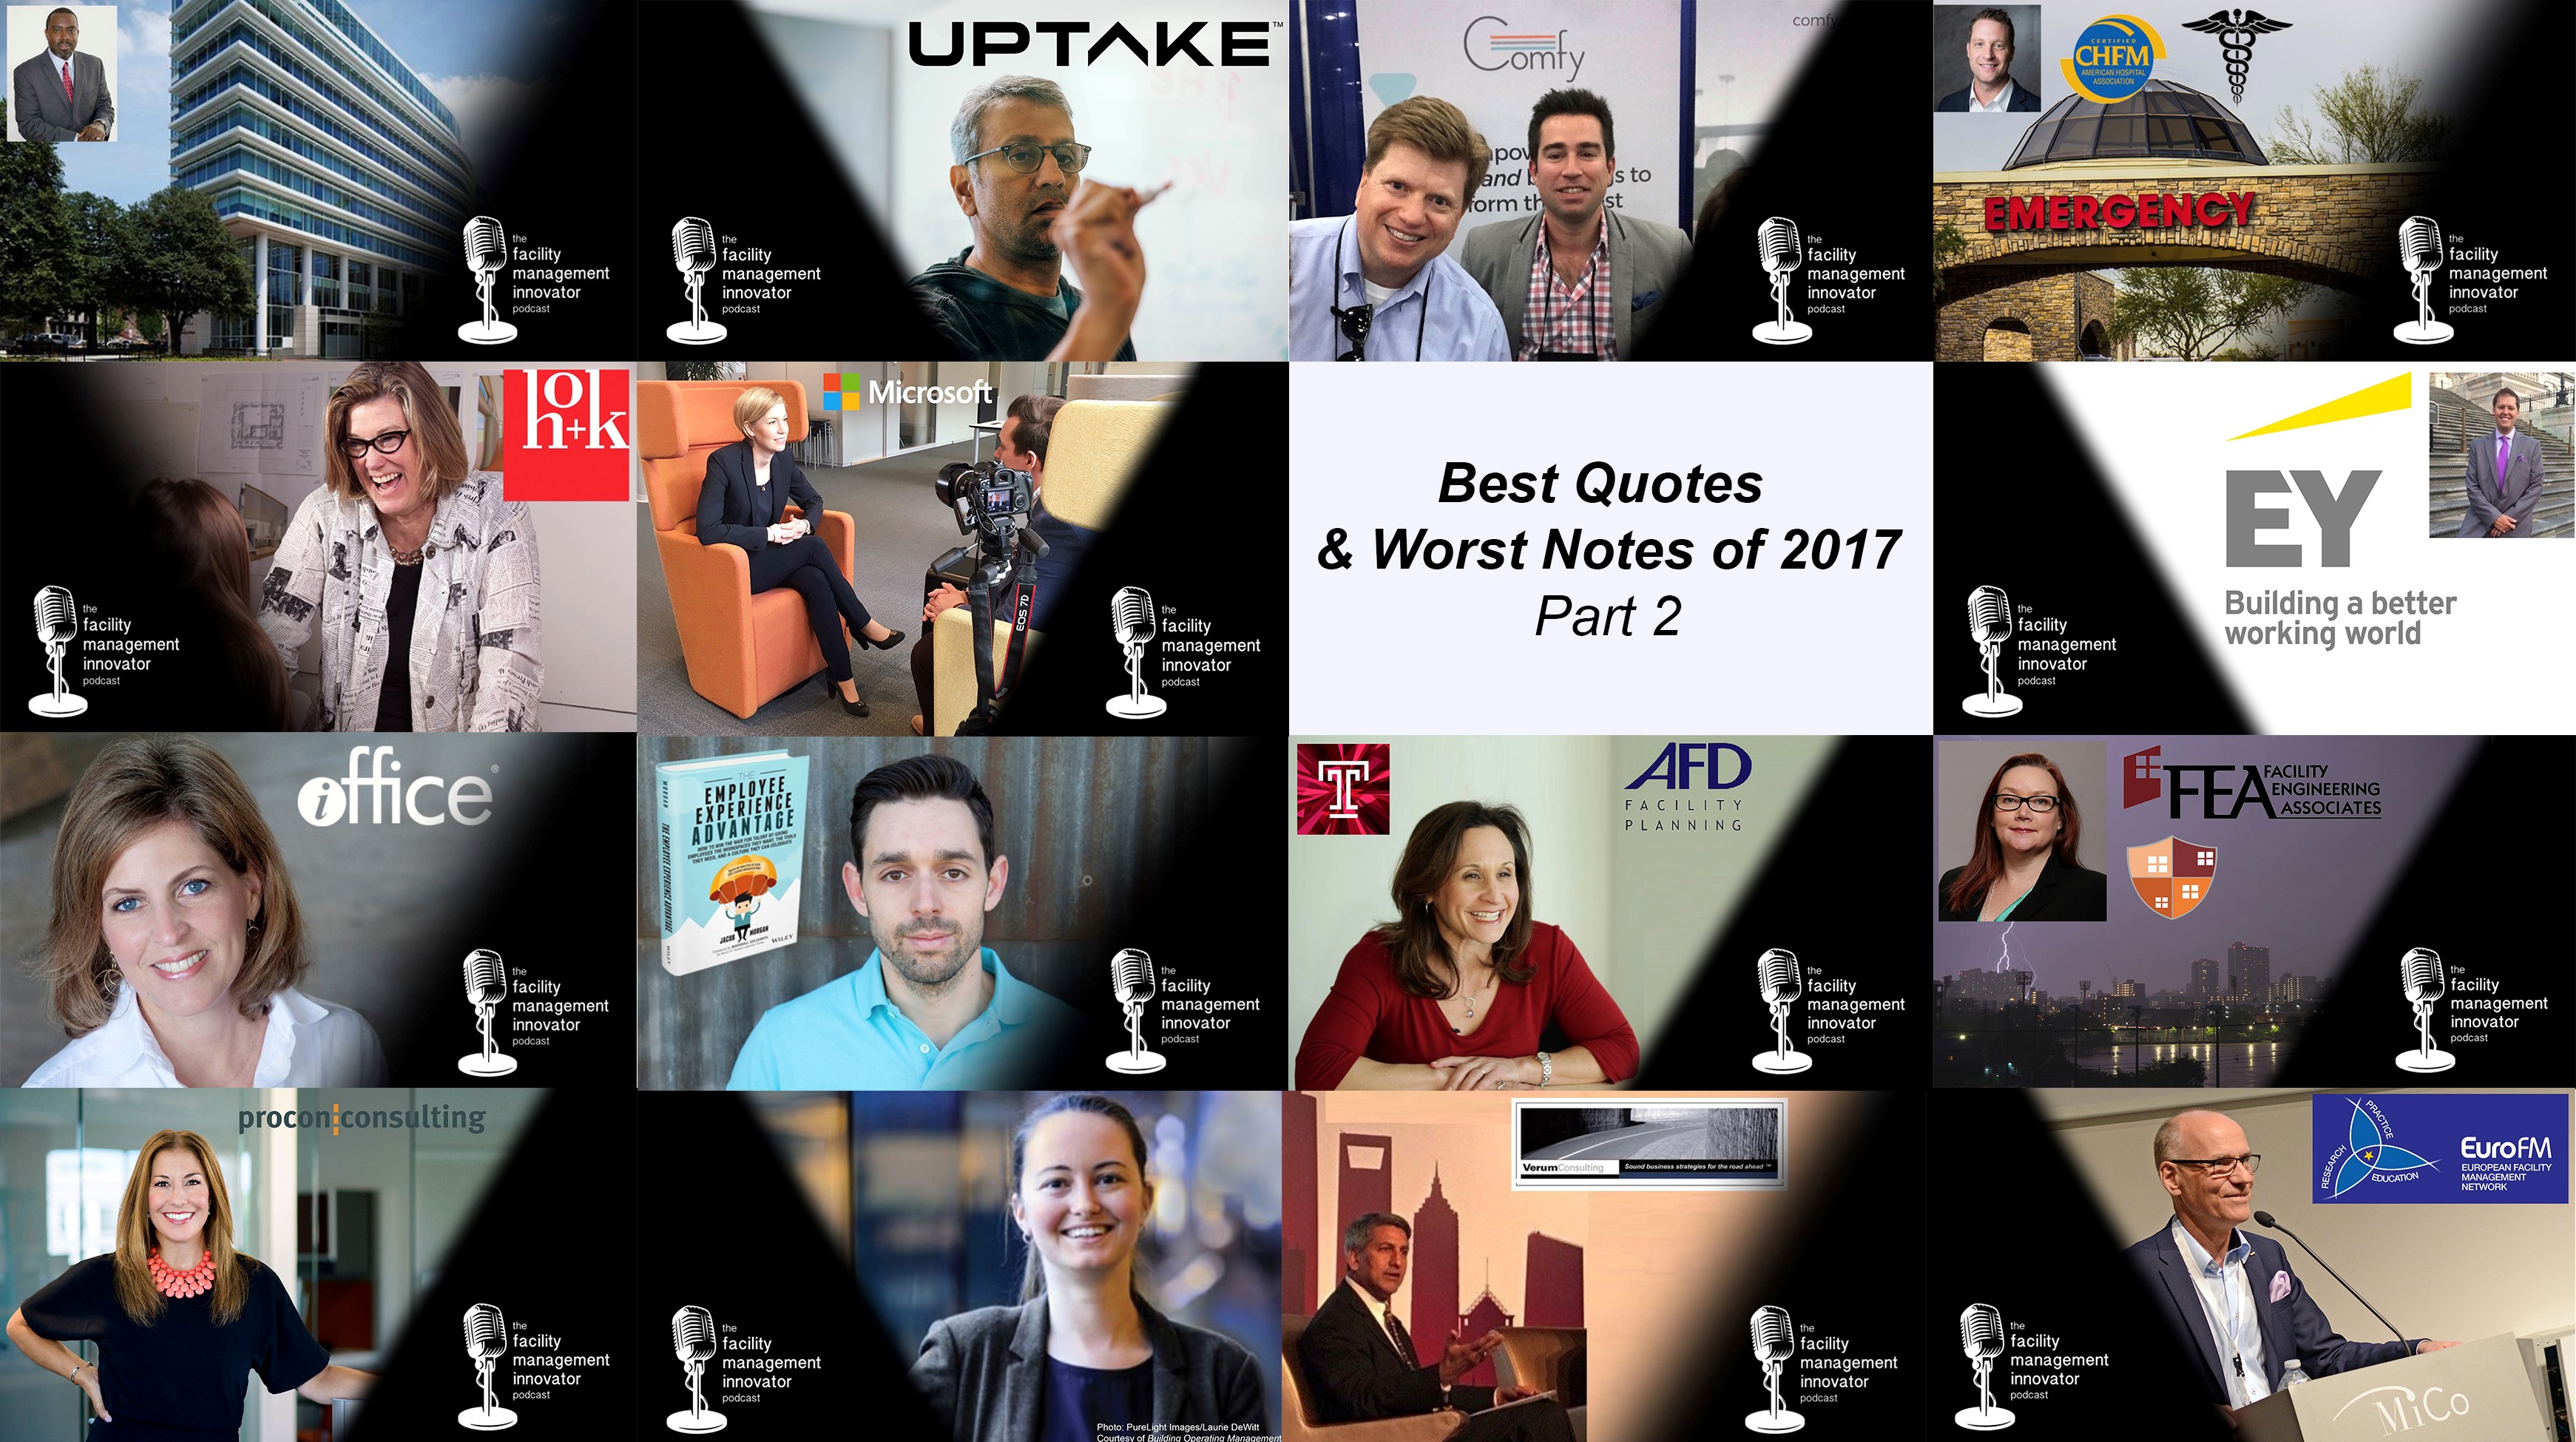 Ep. 70: Best Quotes & Worst Notes of 2017 (Part 2) | An FM Innovator Podcast Retrospective